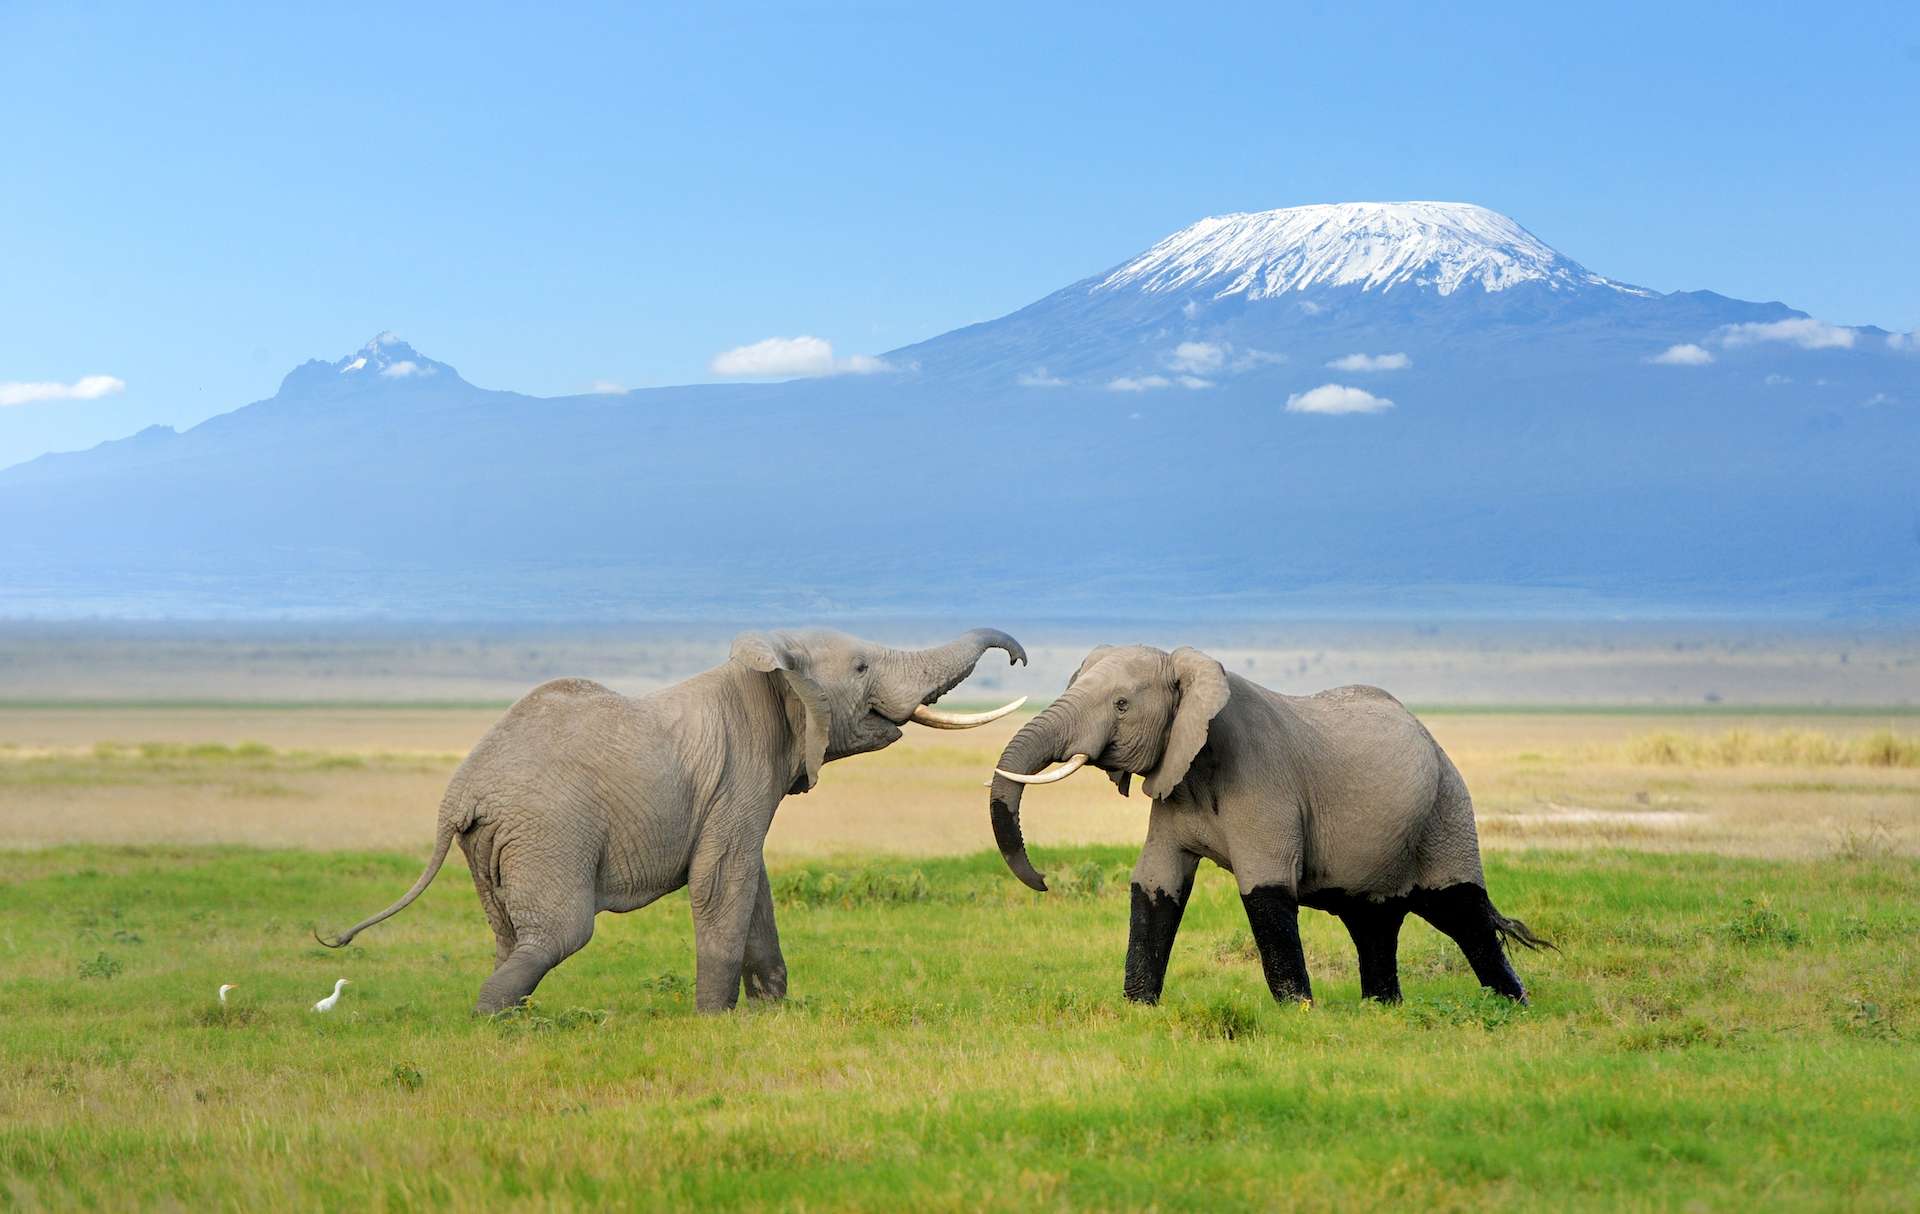 Elephants with Mount Kilimanjaro in the background